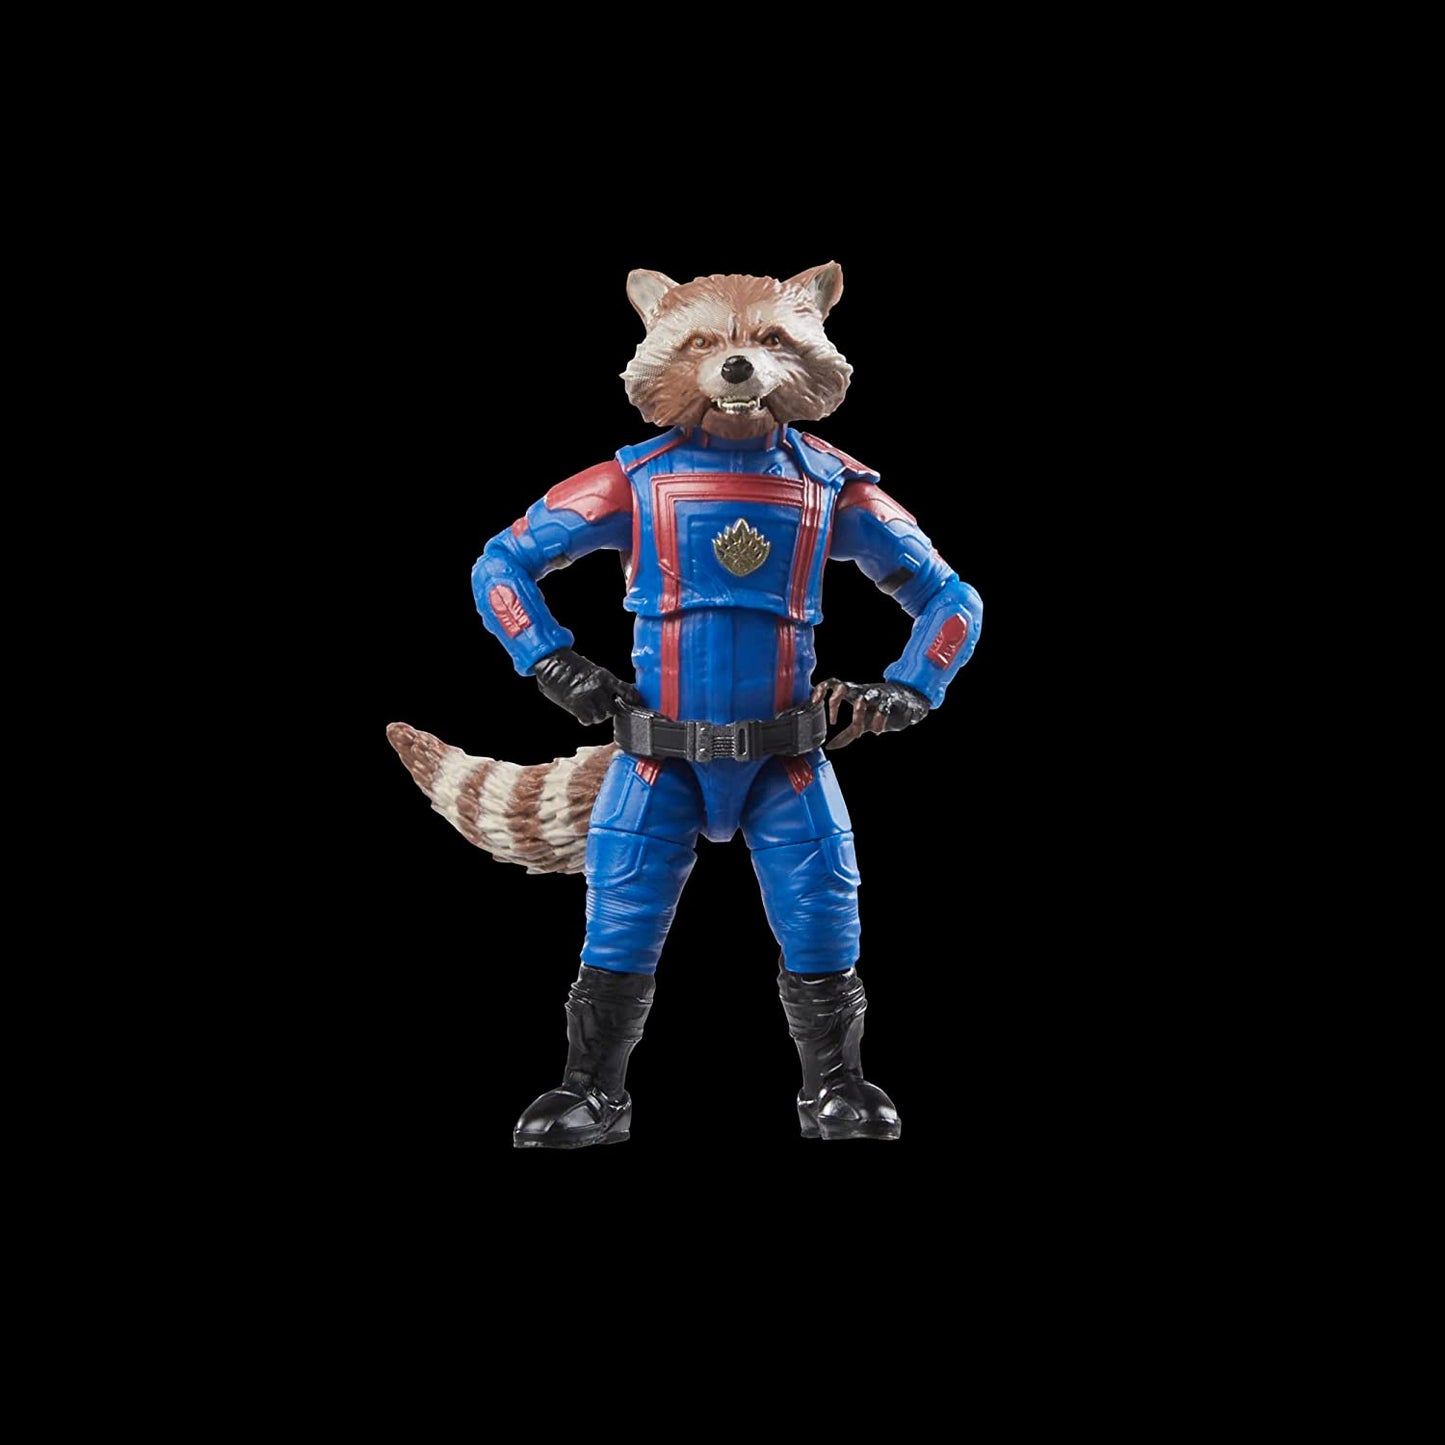 Guardians of The Galaxy Vol. 3 Marvel Legends Rocket 6-Inch Action Figure Toy Standing pose - Heretoserveyou